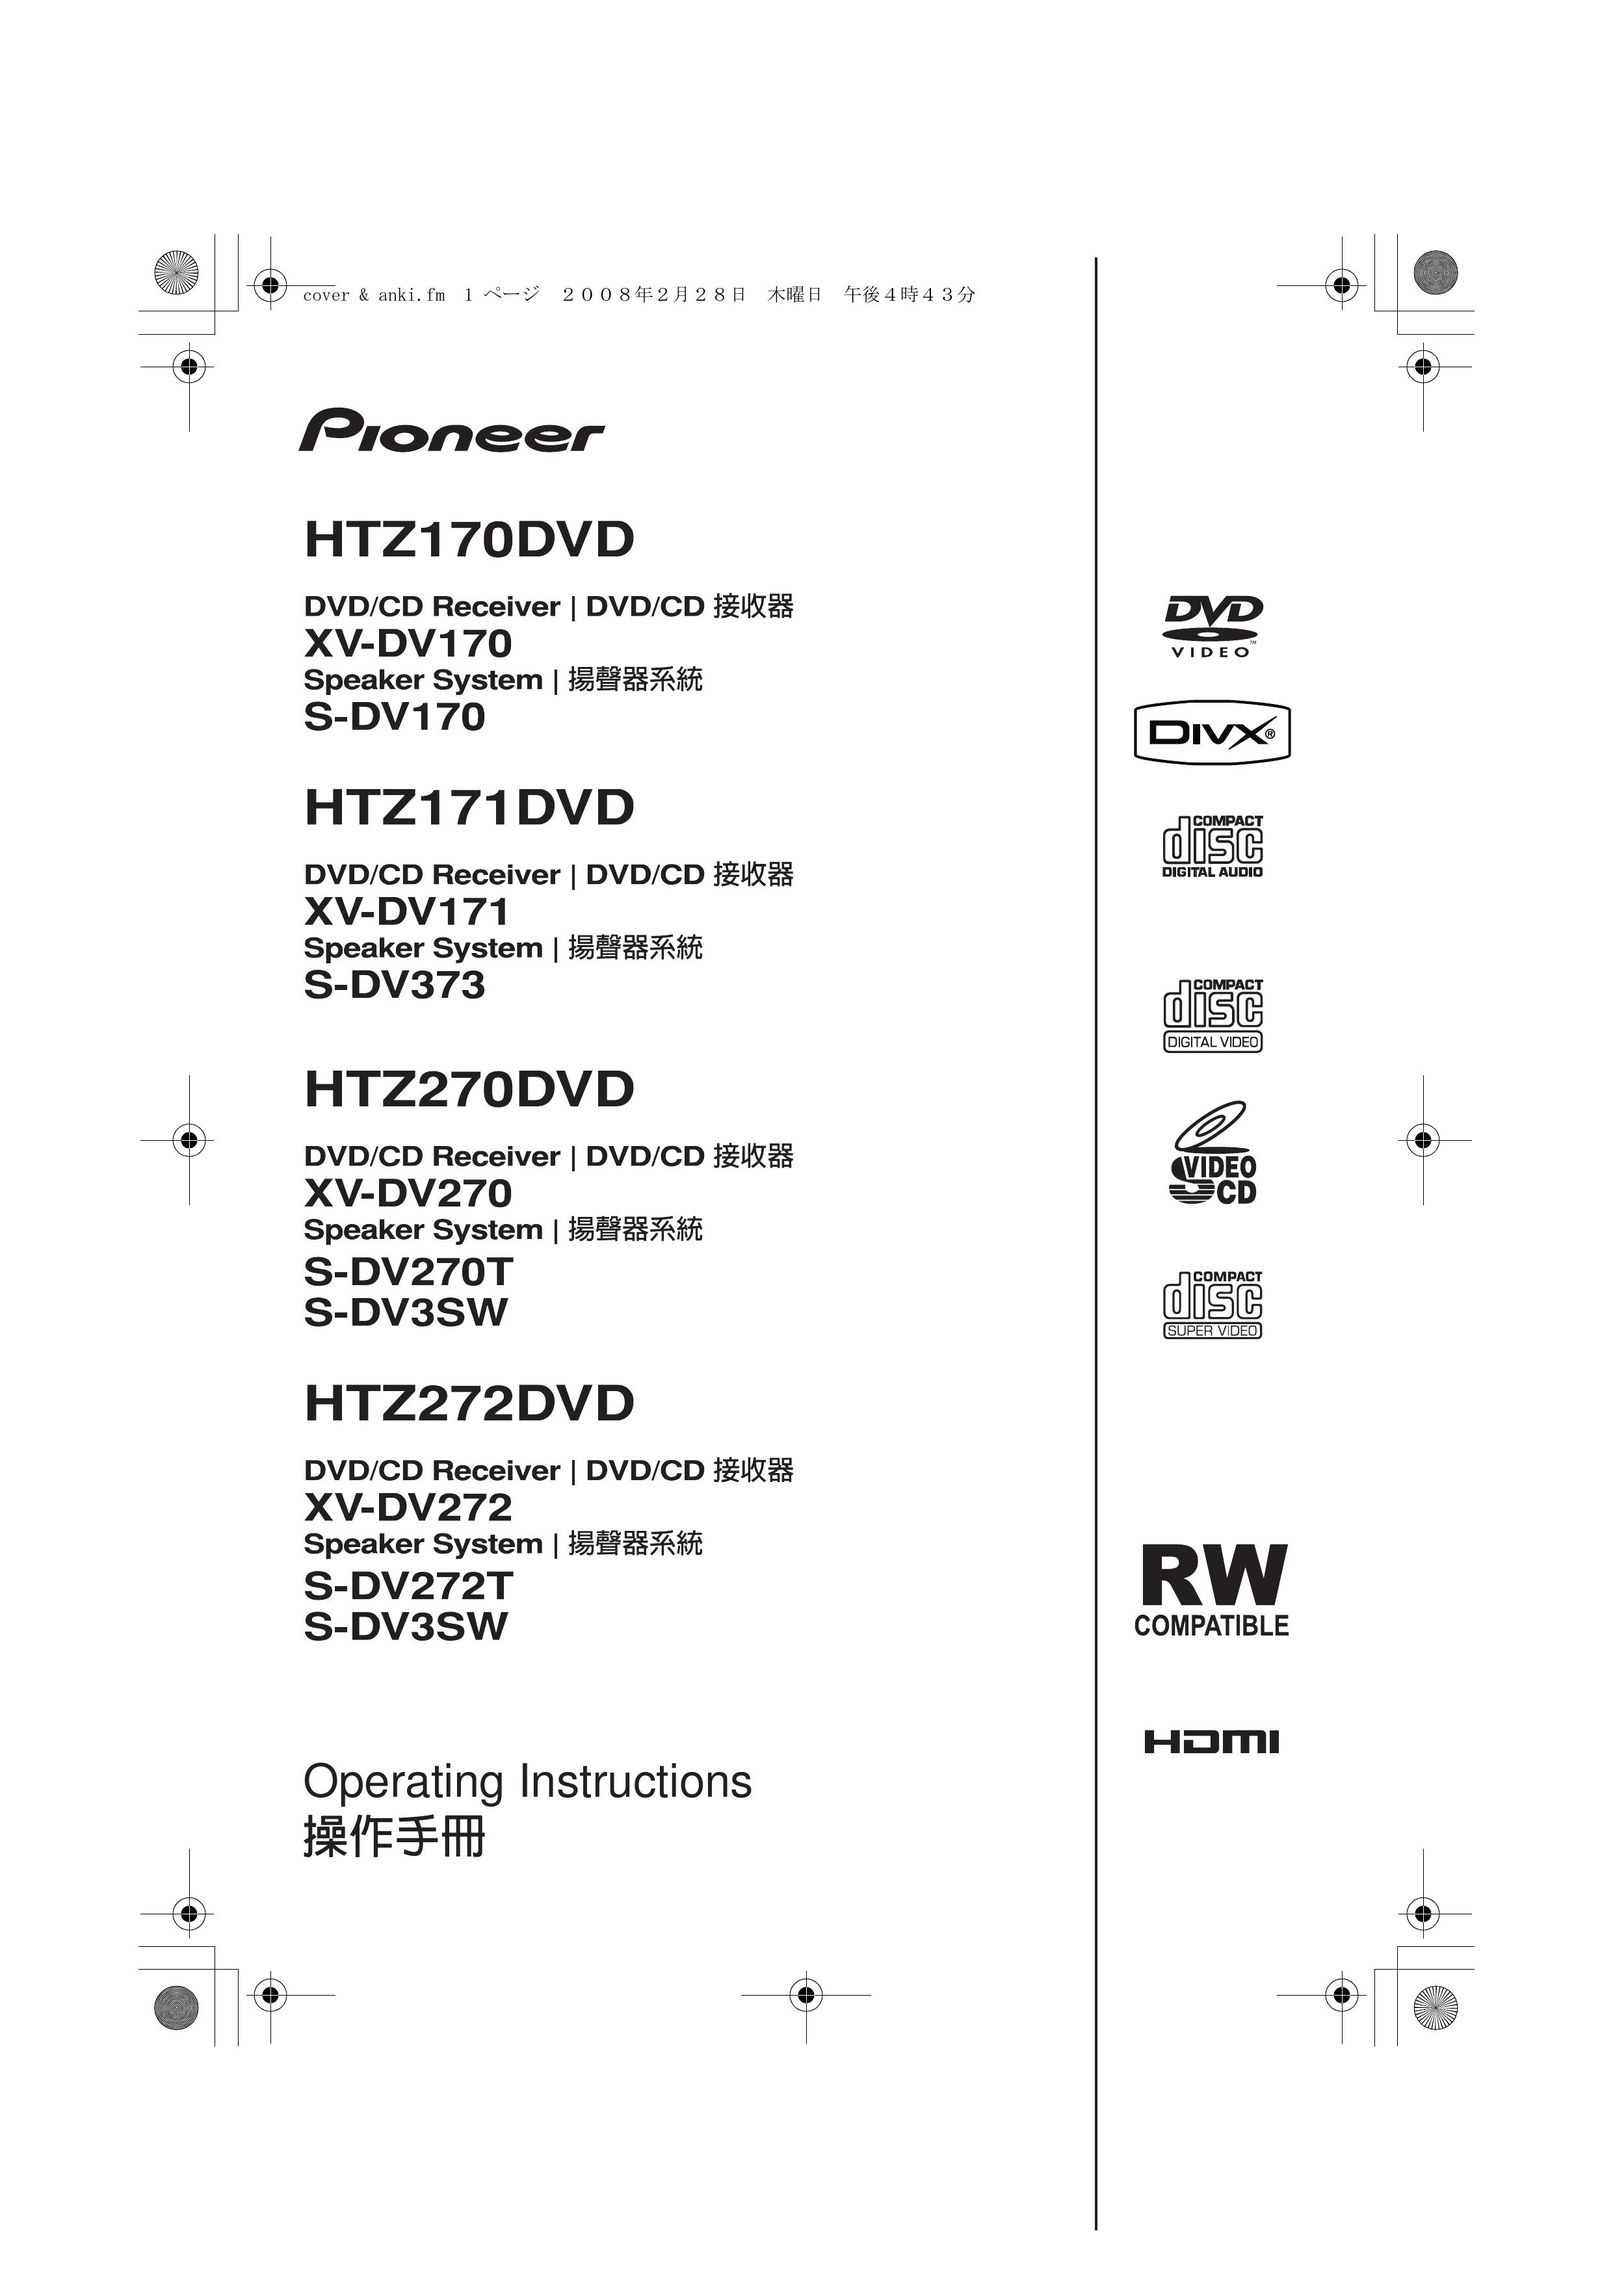 Pioneer HTZ170DVD Home Theater System User Manual